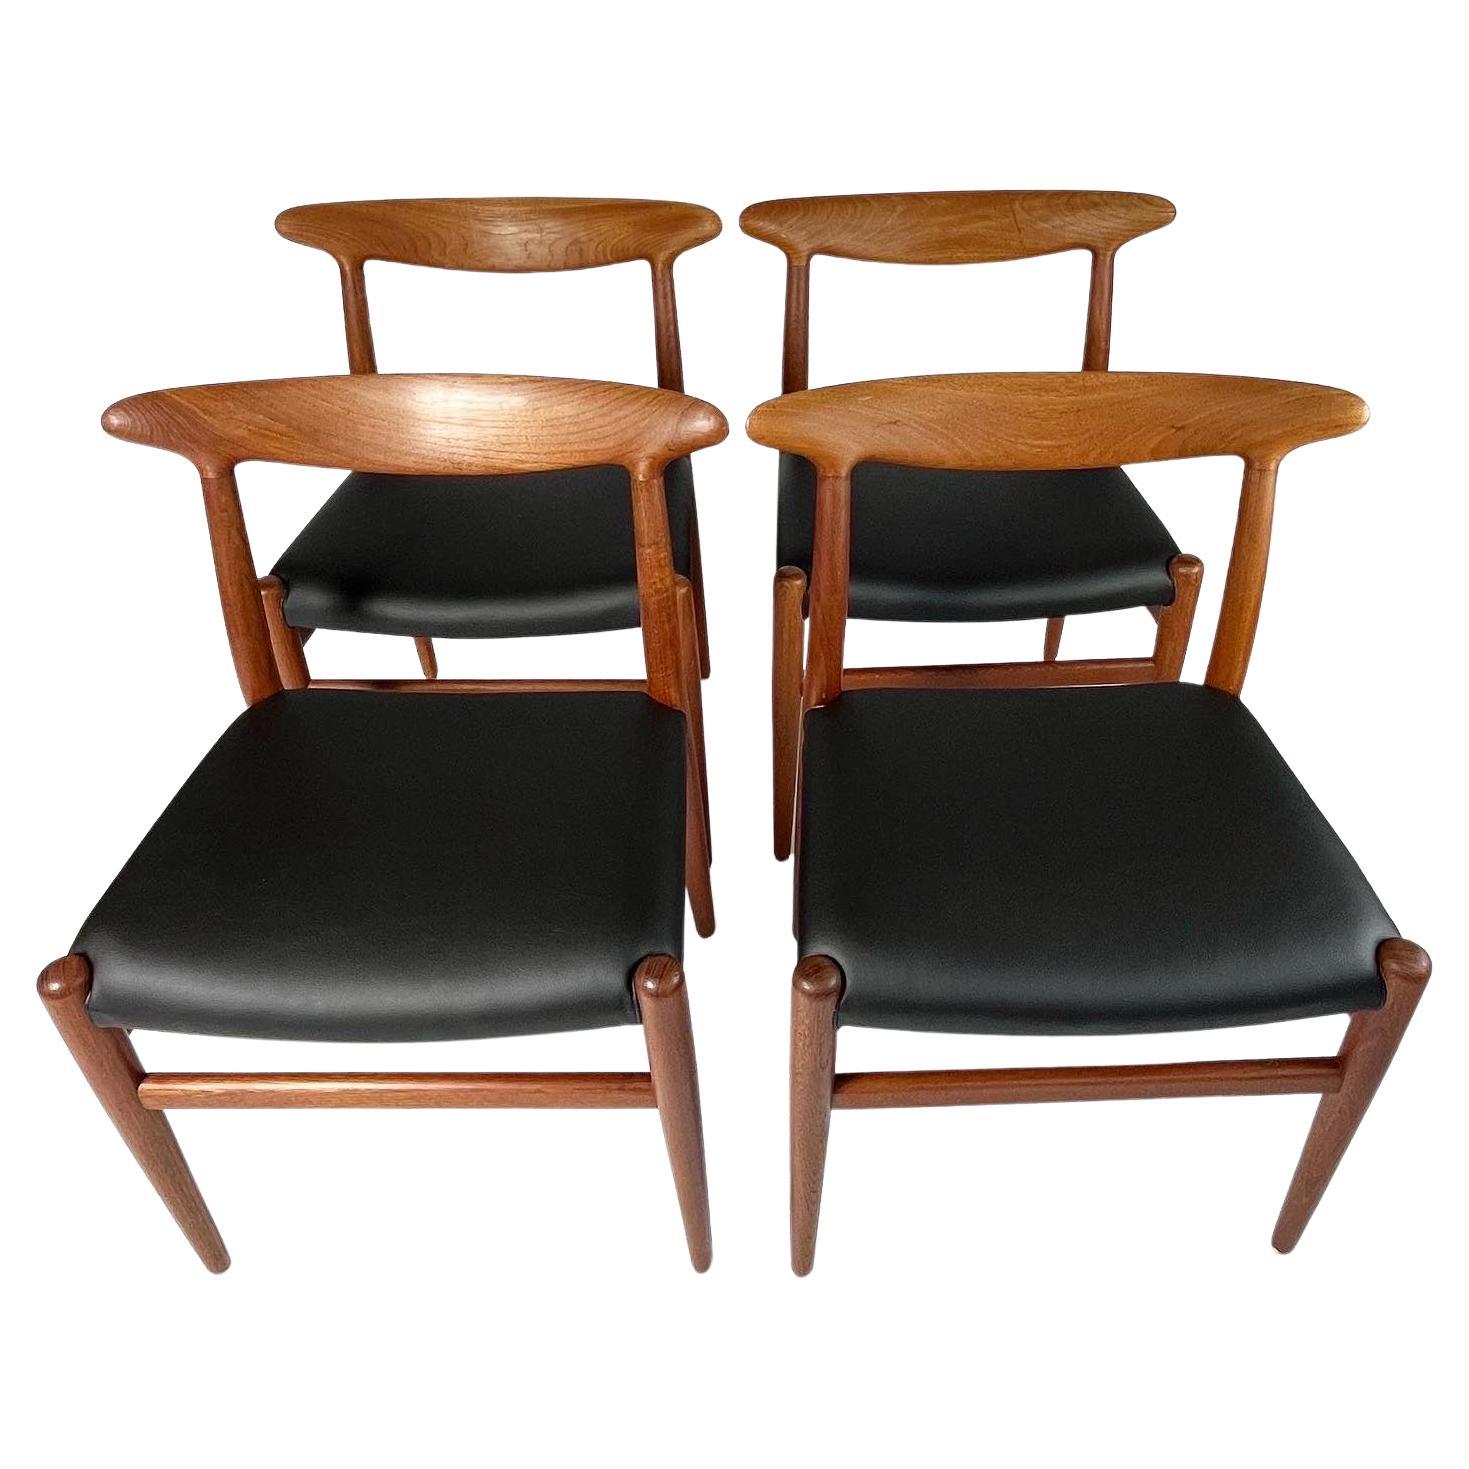 Set of four Hans J. Wegner dining chairs, model W2, designed in 1953 for C.M. Madsens Fabriker in Denmark.

Solid teak frames, new upholstered with award winning black cacti leather by Desserto, a beautiful plant-based and more sustainable